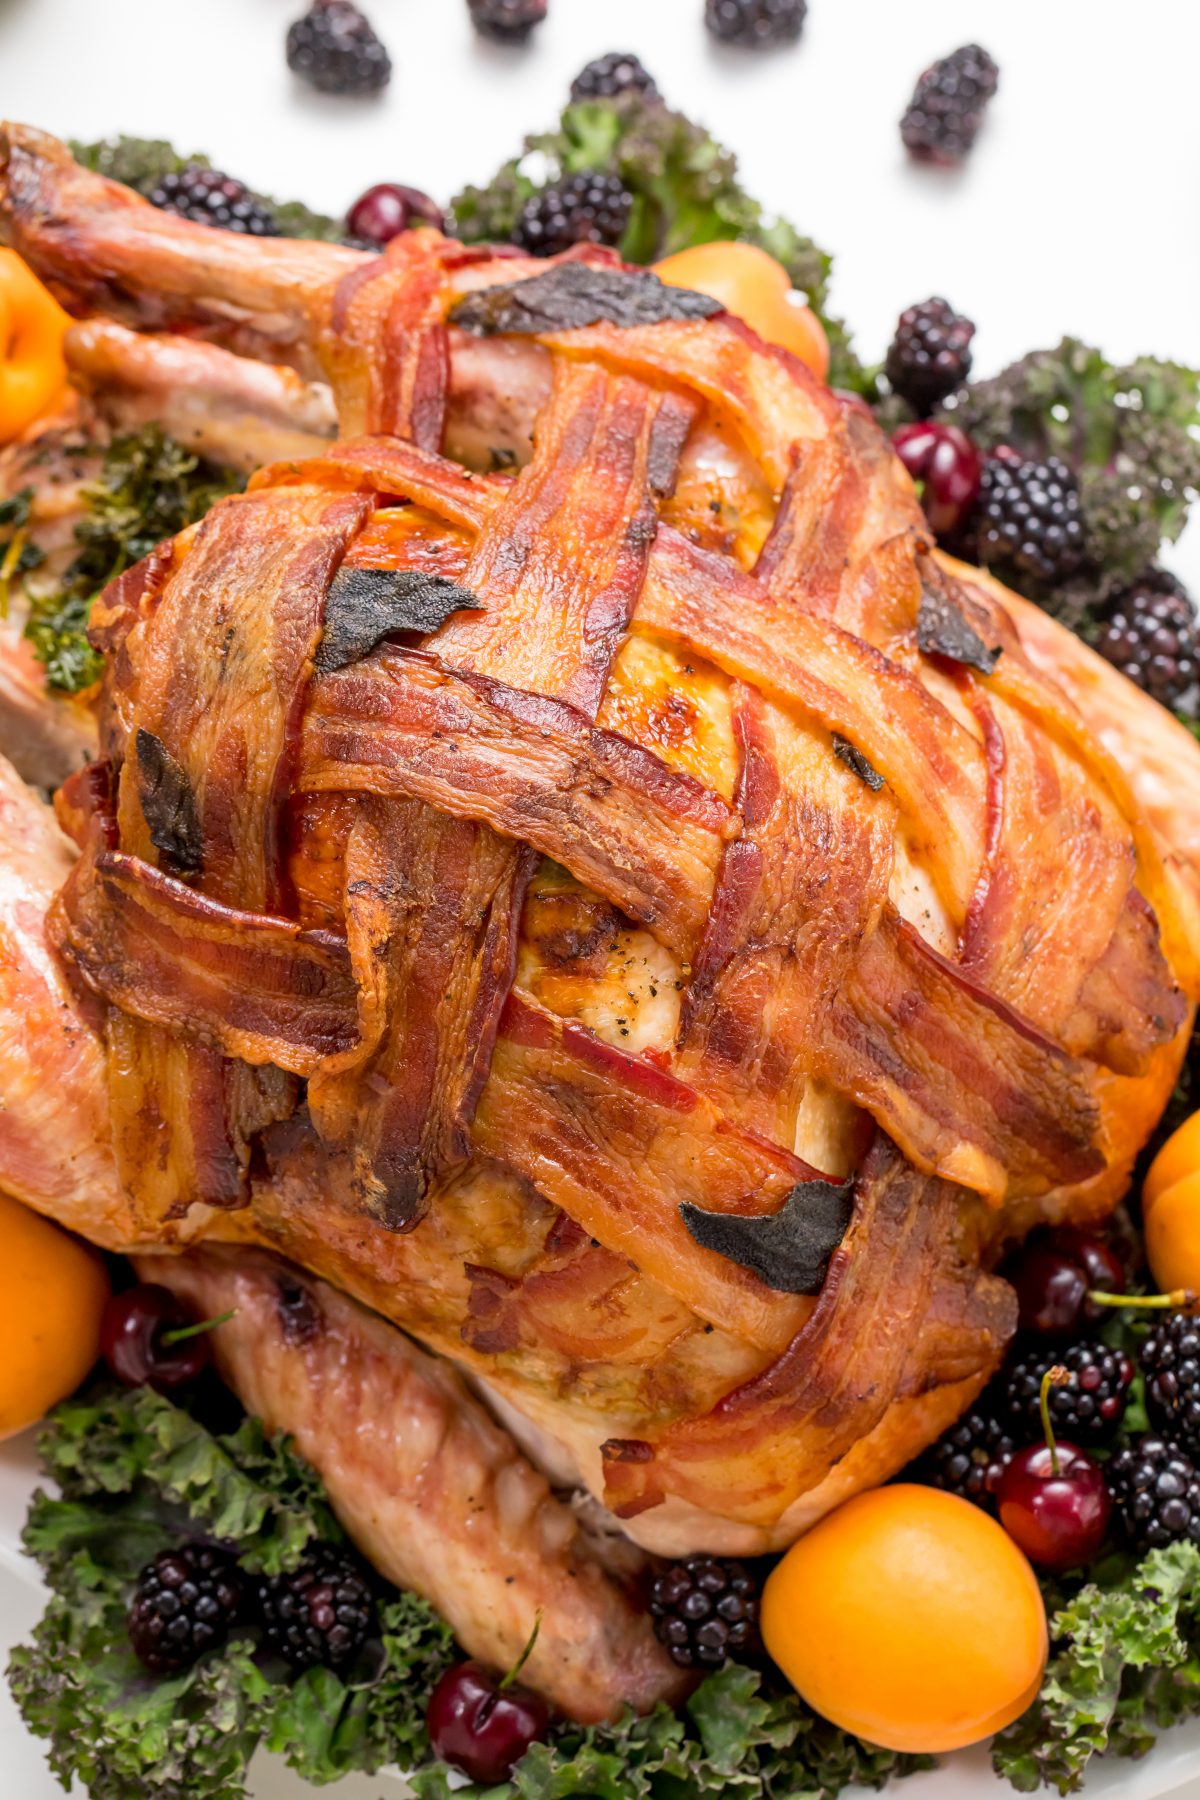 Try This Delicious Bacon Wrapped Turkey For Thanksgiving Or Christmas Because Everything Is